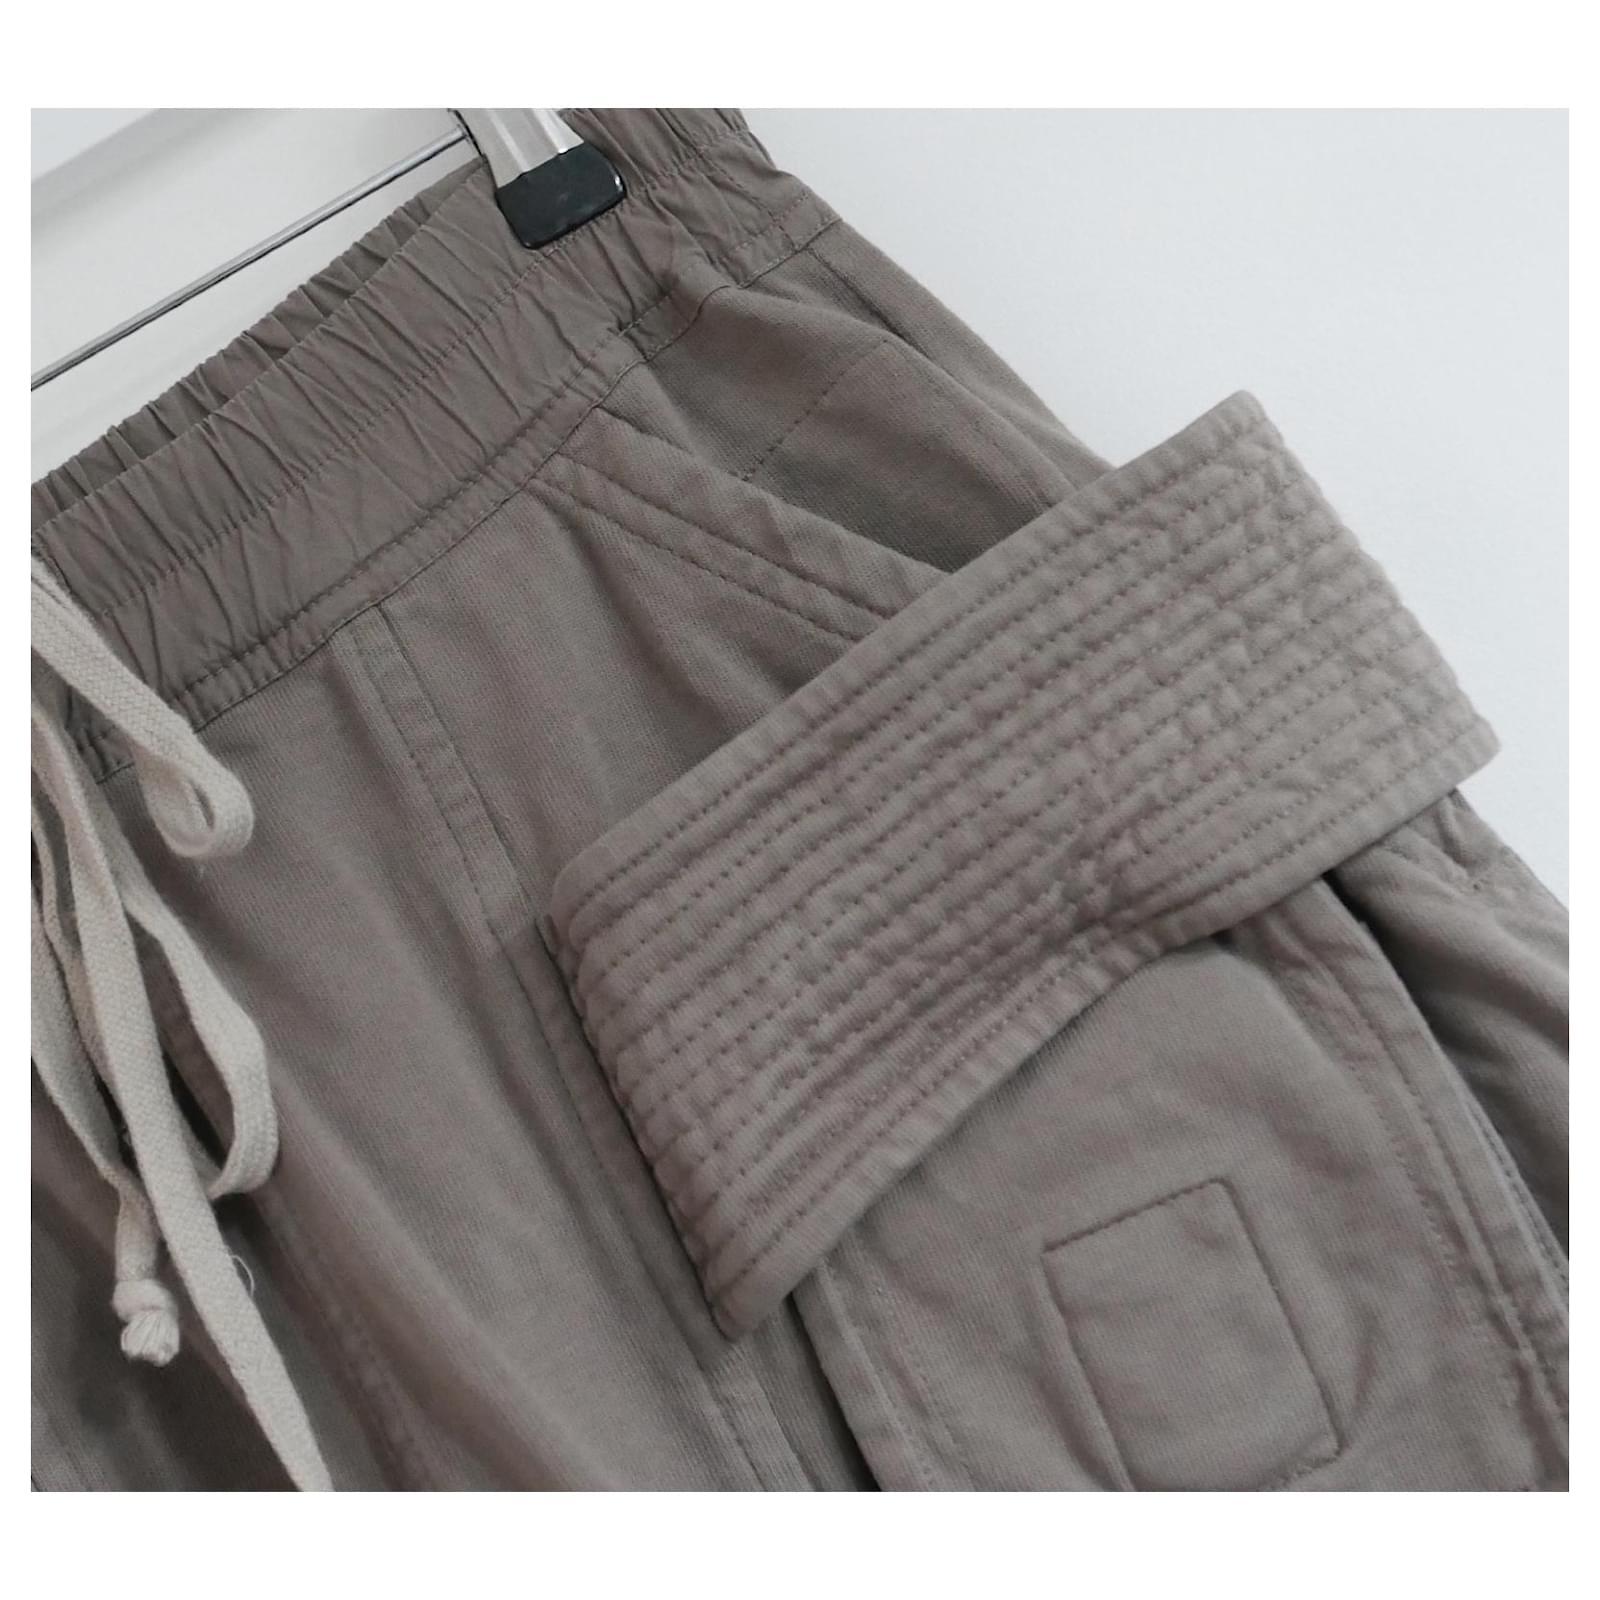 Super rare Rick Owens DRKSHDW Creatch cargo pants - model ref DS19F6327-RIG. Worn once. Unisex. Made from thick fawn coloured vintage look cotton jersey with contrast trims. They have multiple pockets, quilted strap details, elasticated drawstring